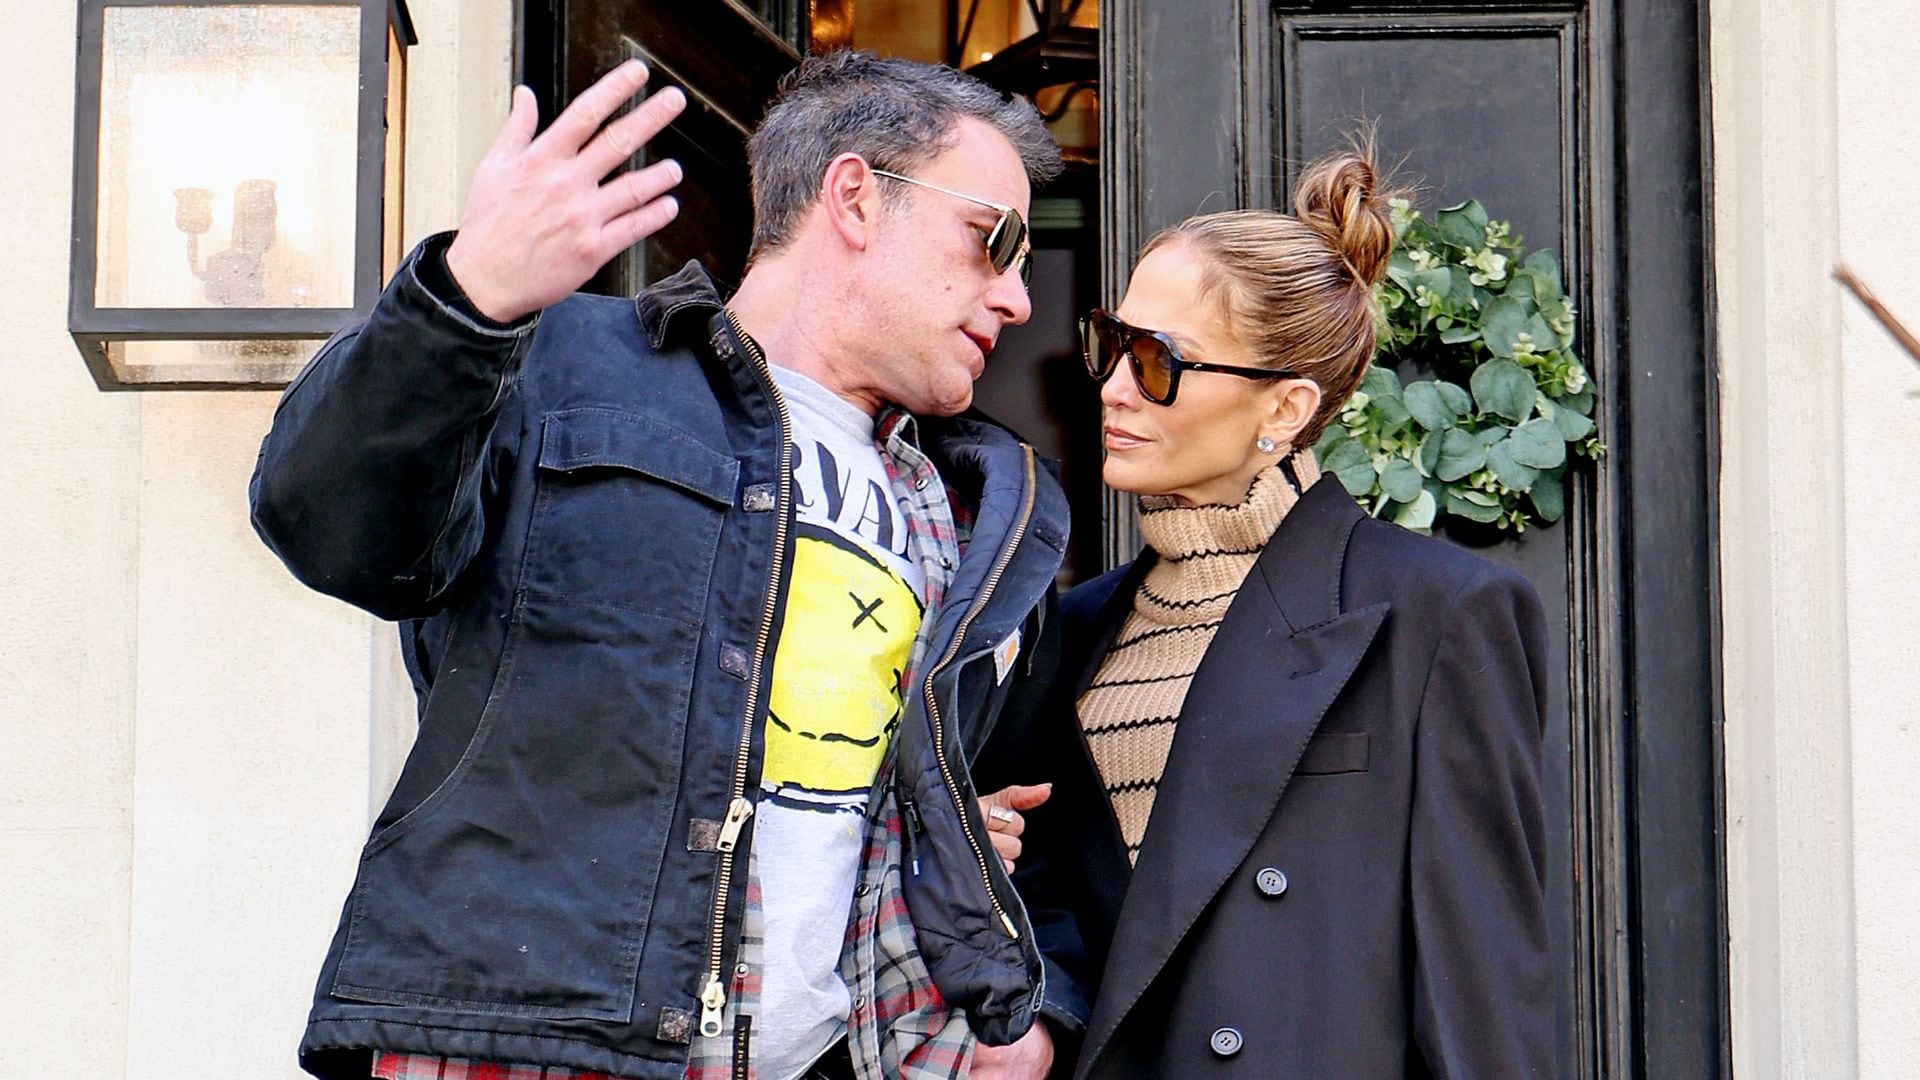 Is Jennifer Lopez hinting at Ben Affleck's divorce with this song?